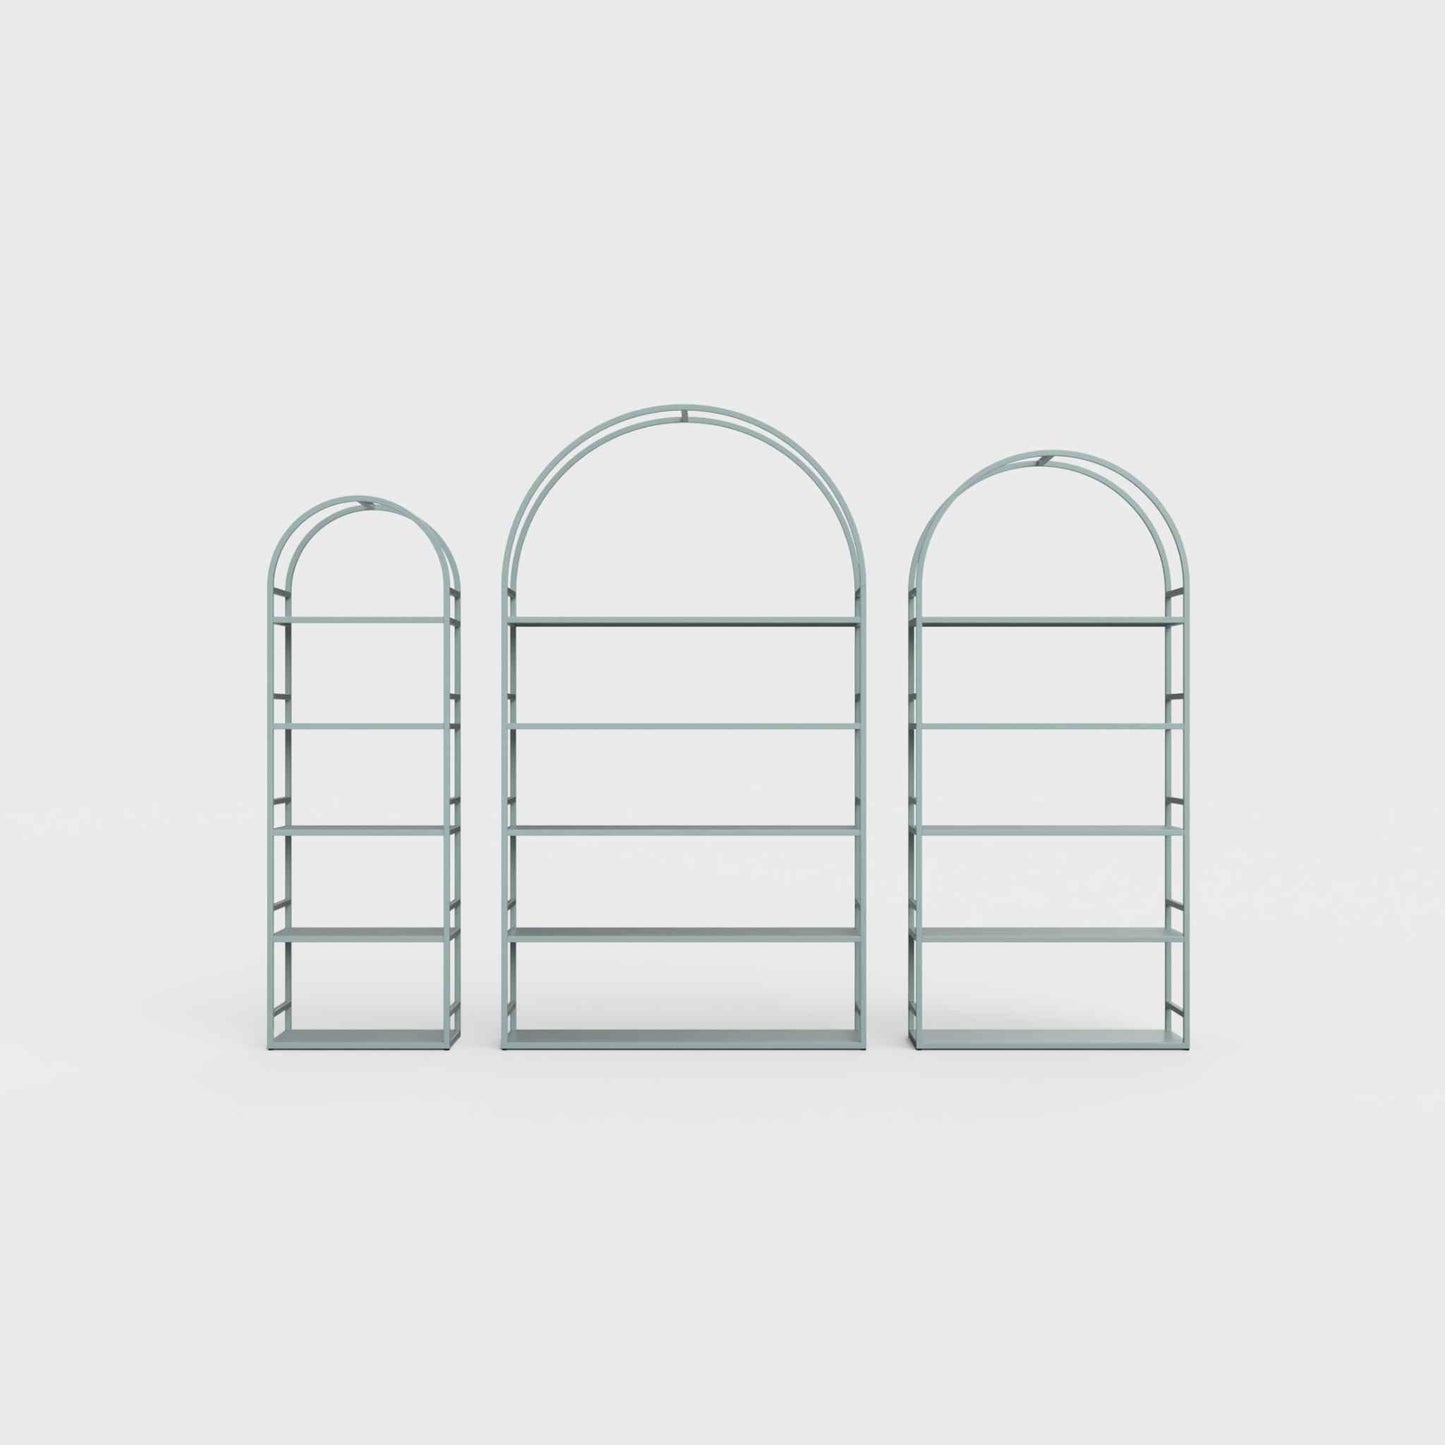 Arched bookcase Arkada, available in Switzerland through ÉTAUDORÉ, made from highest quality powdered coated steel in celadon green color